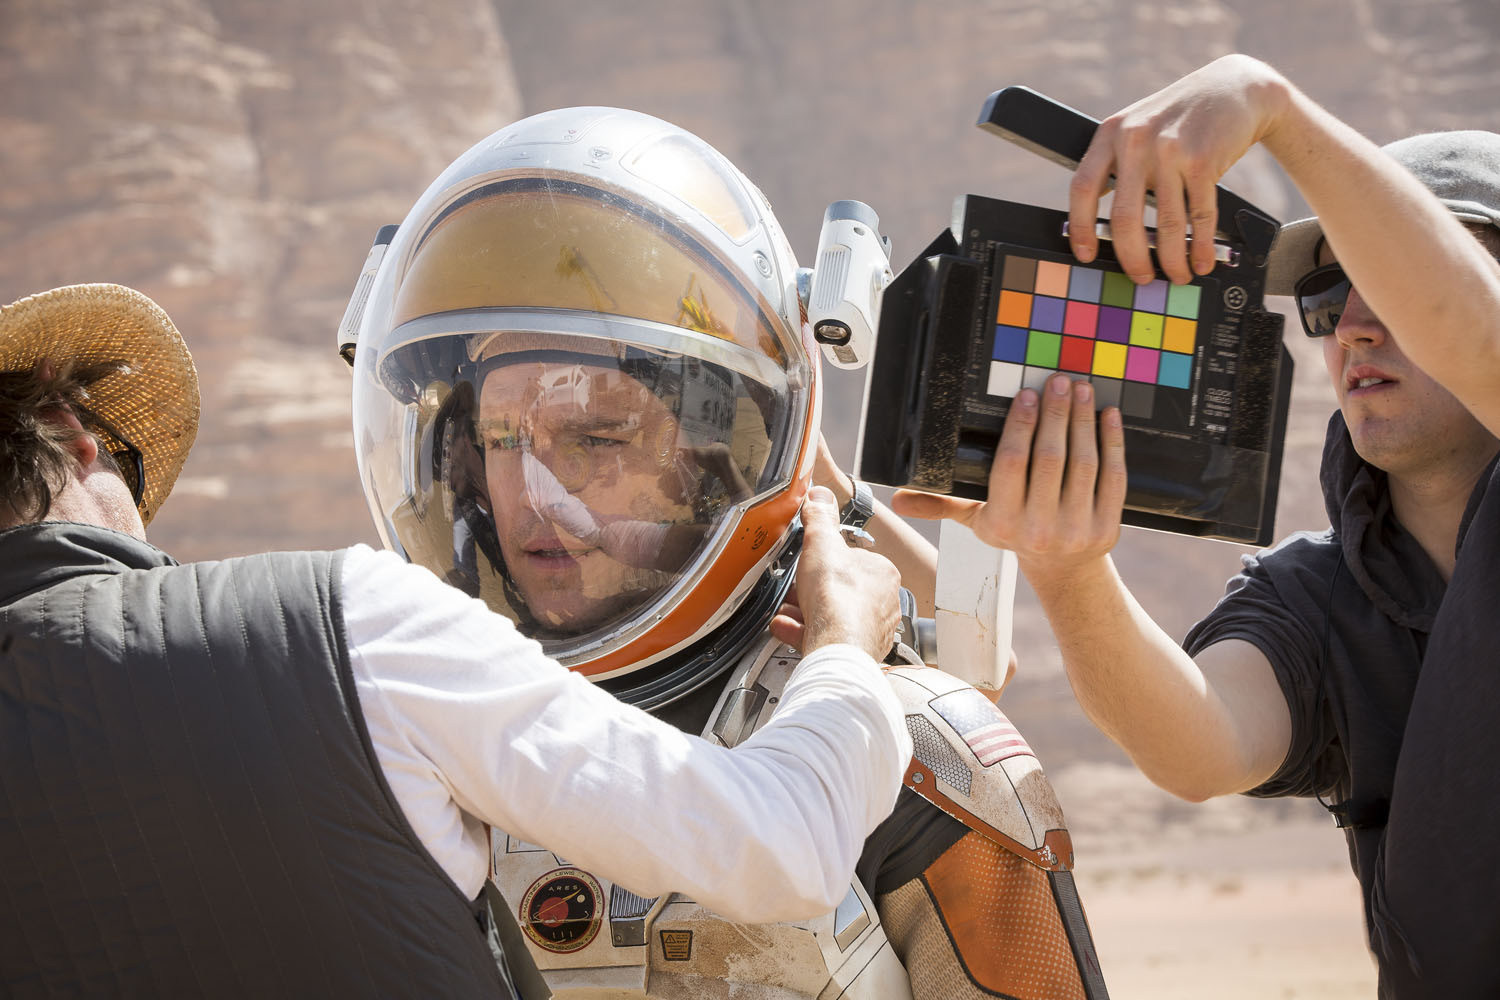 On Location : The Martian (2015) Behind the Scenes